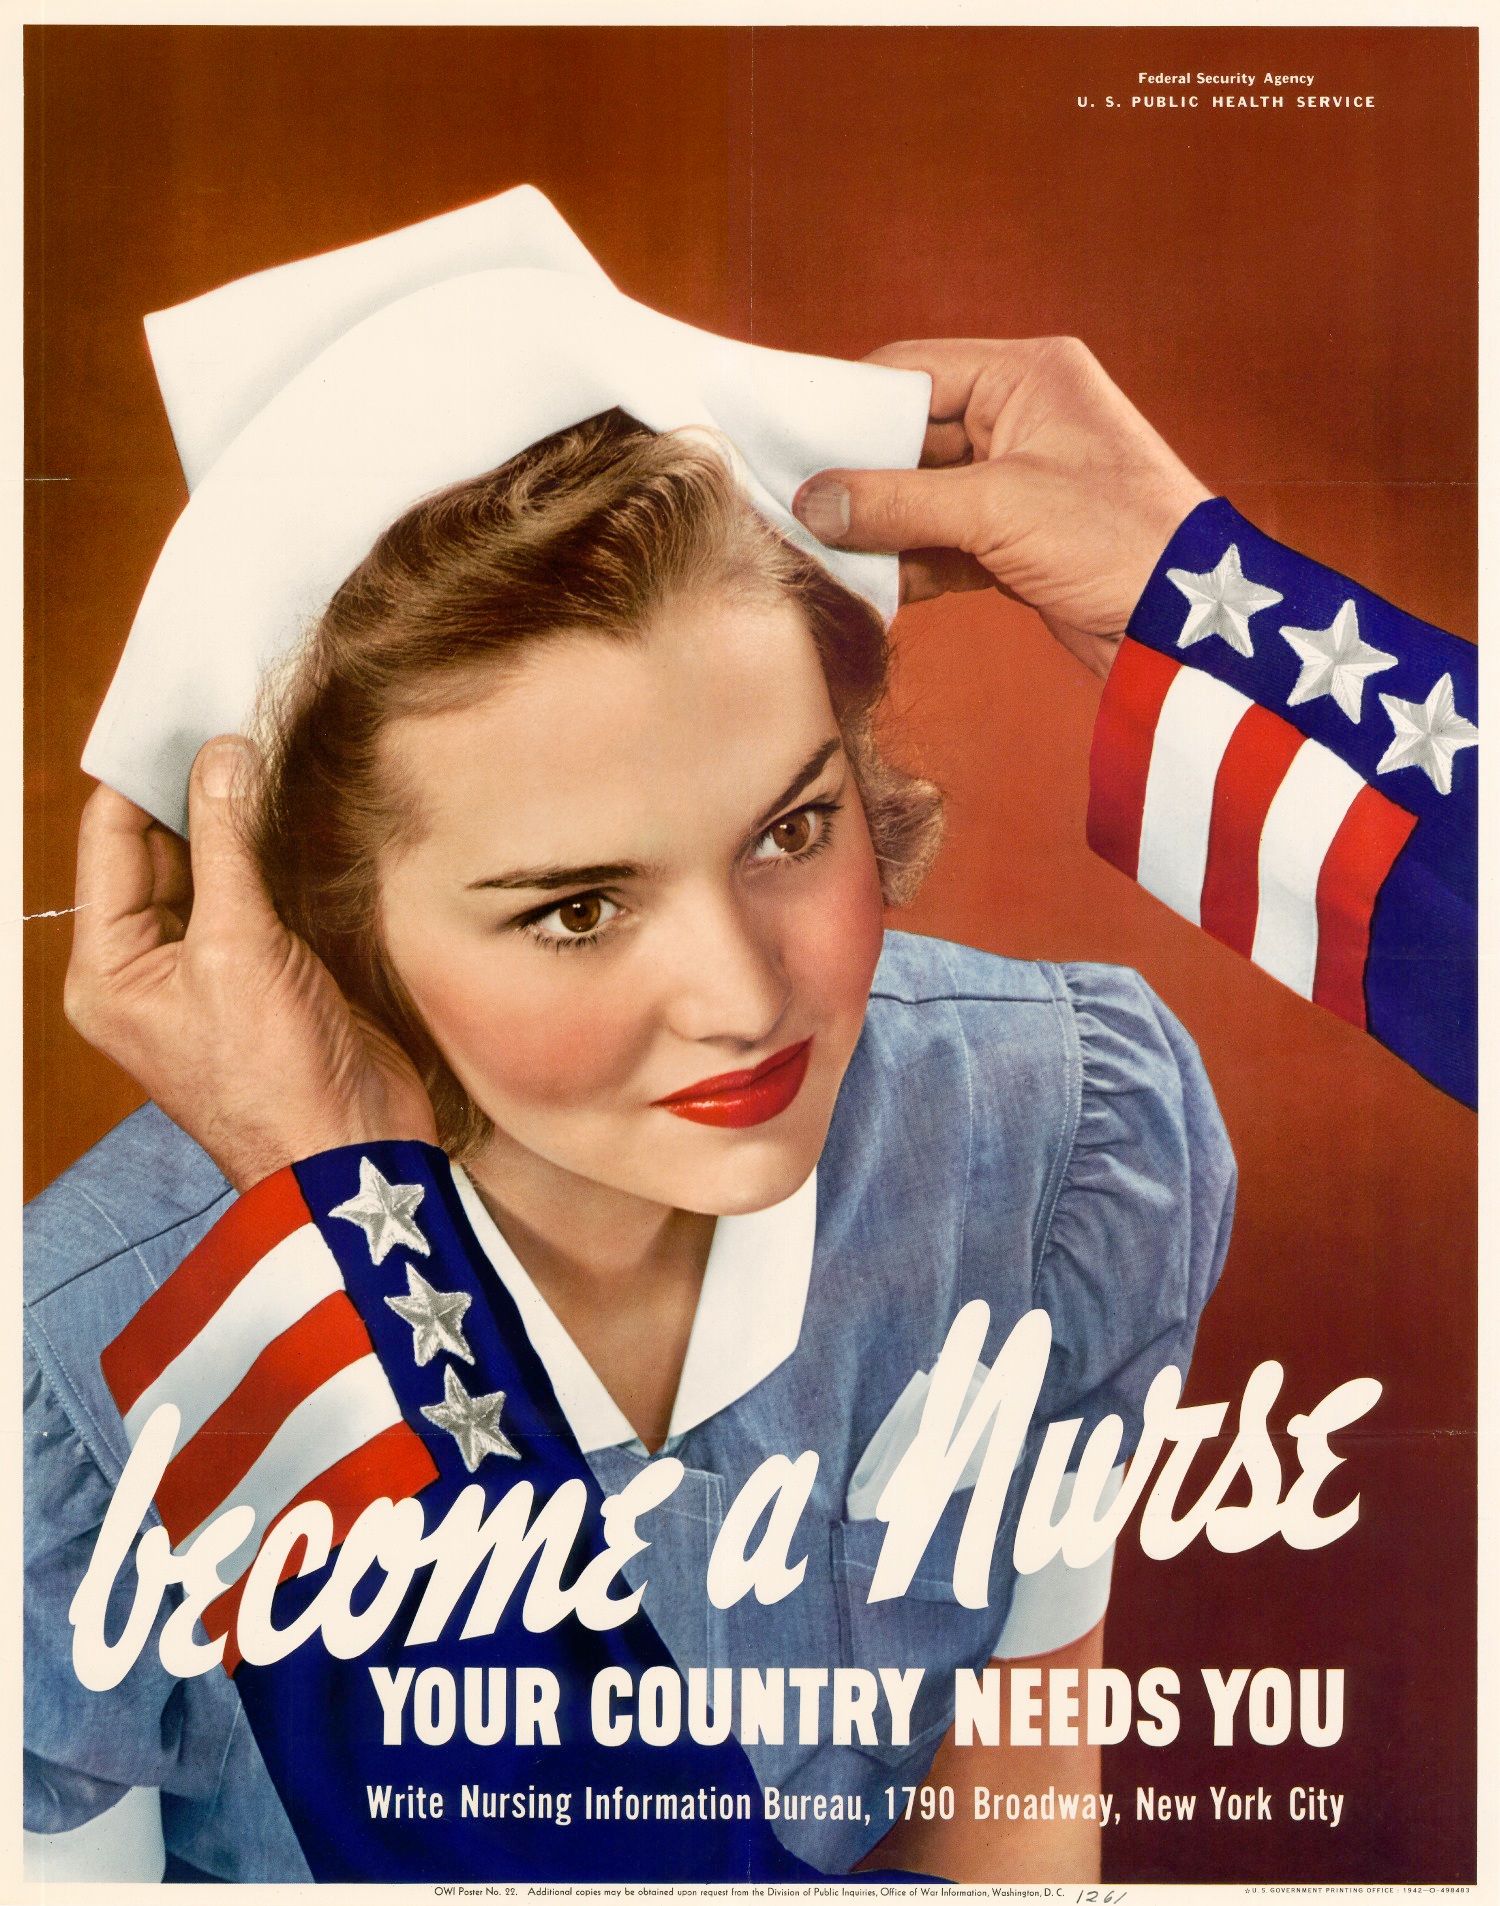 Become a Nurse: Your Country Needs You WWII Poster